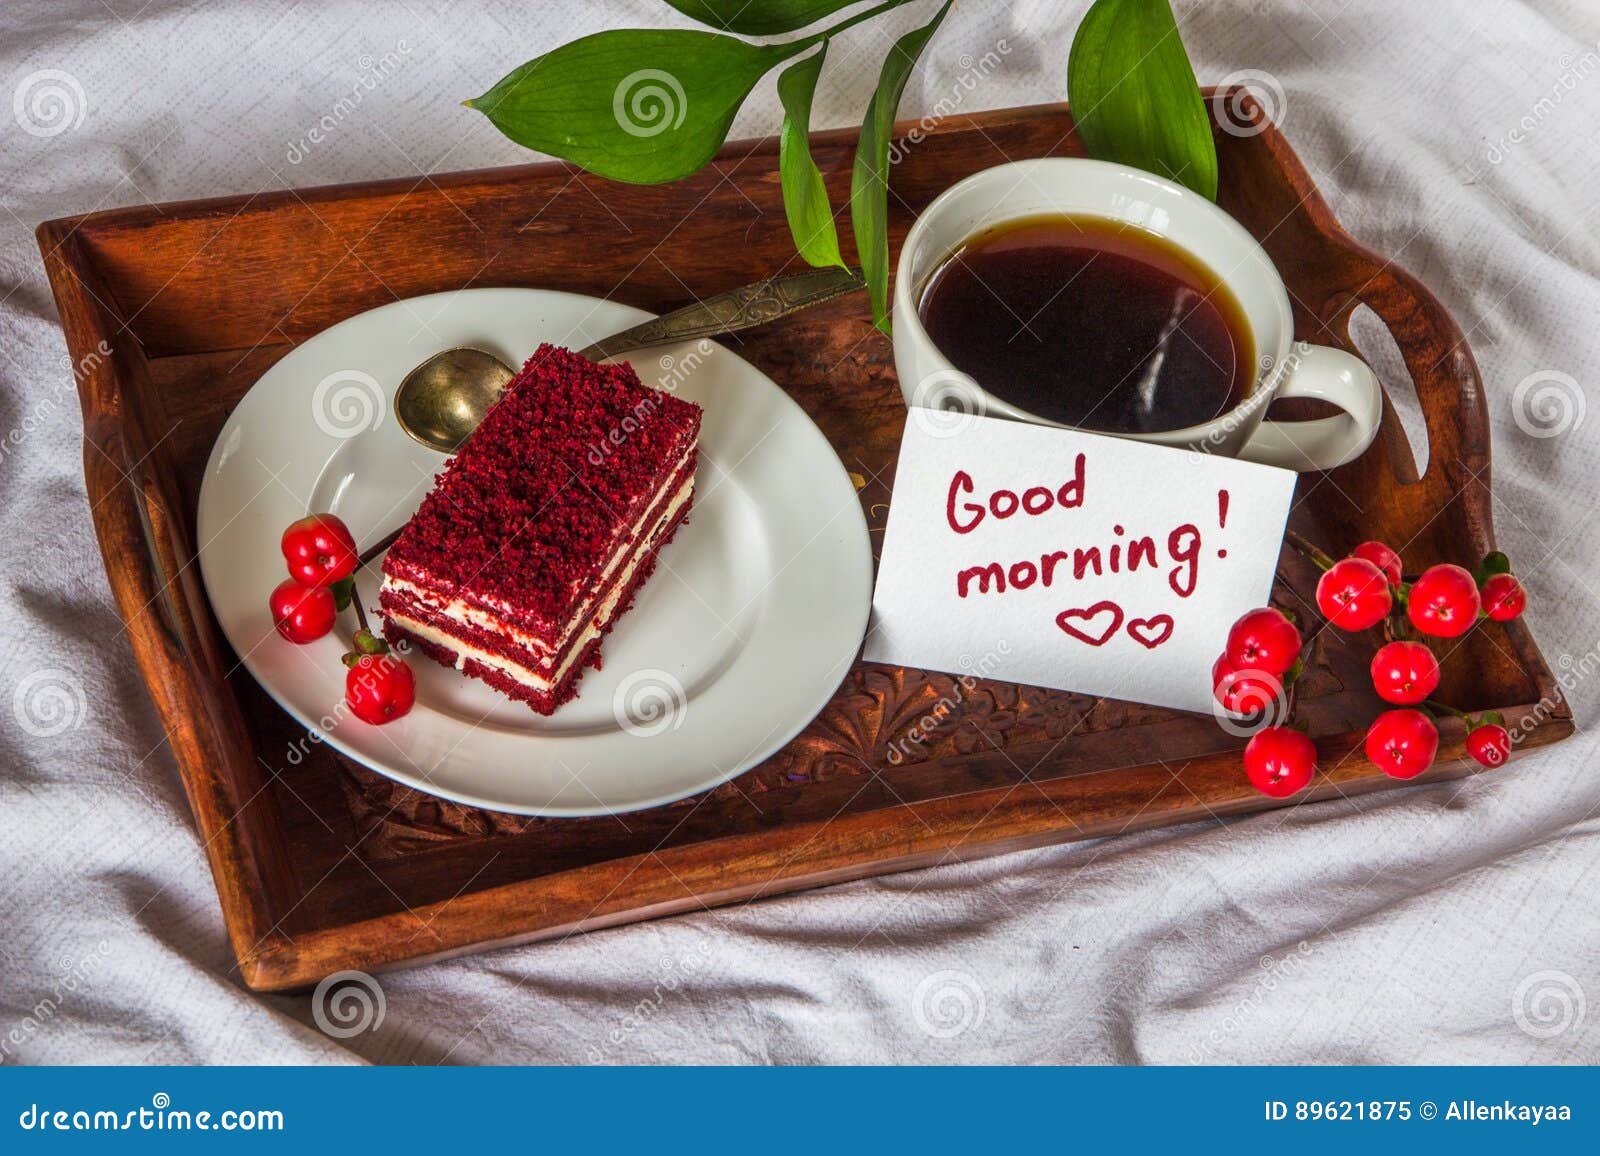 Breakfast in Bed. Cup, Coffee, Red, Velvet, Cake and Note with T ...